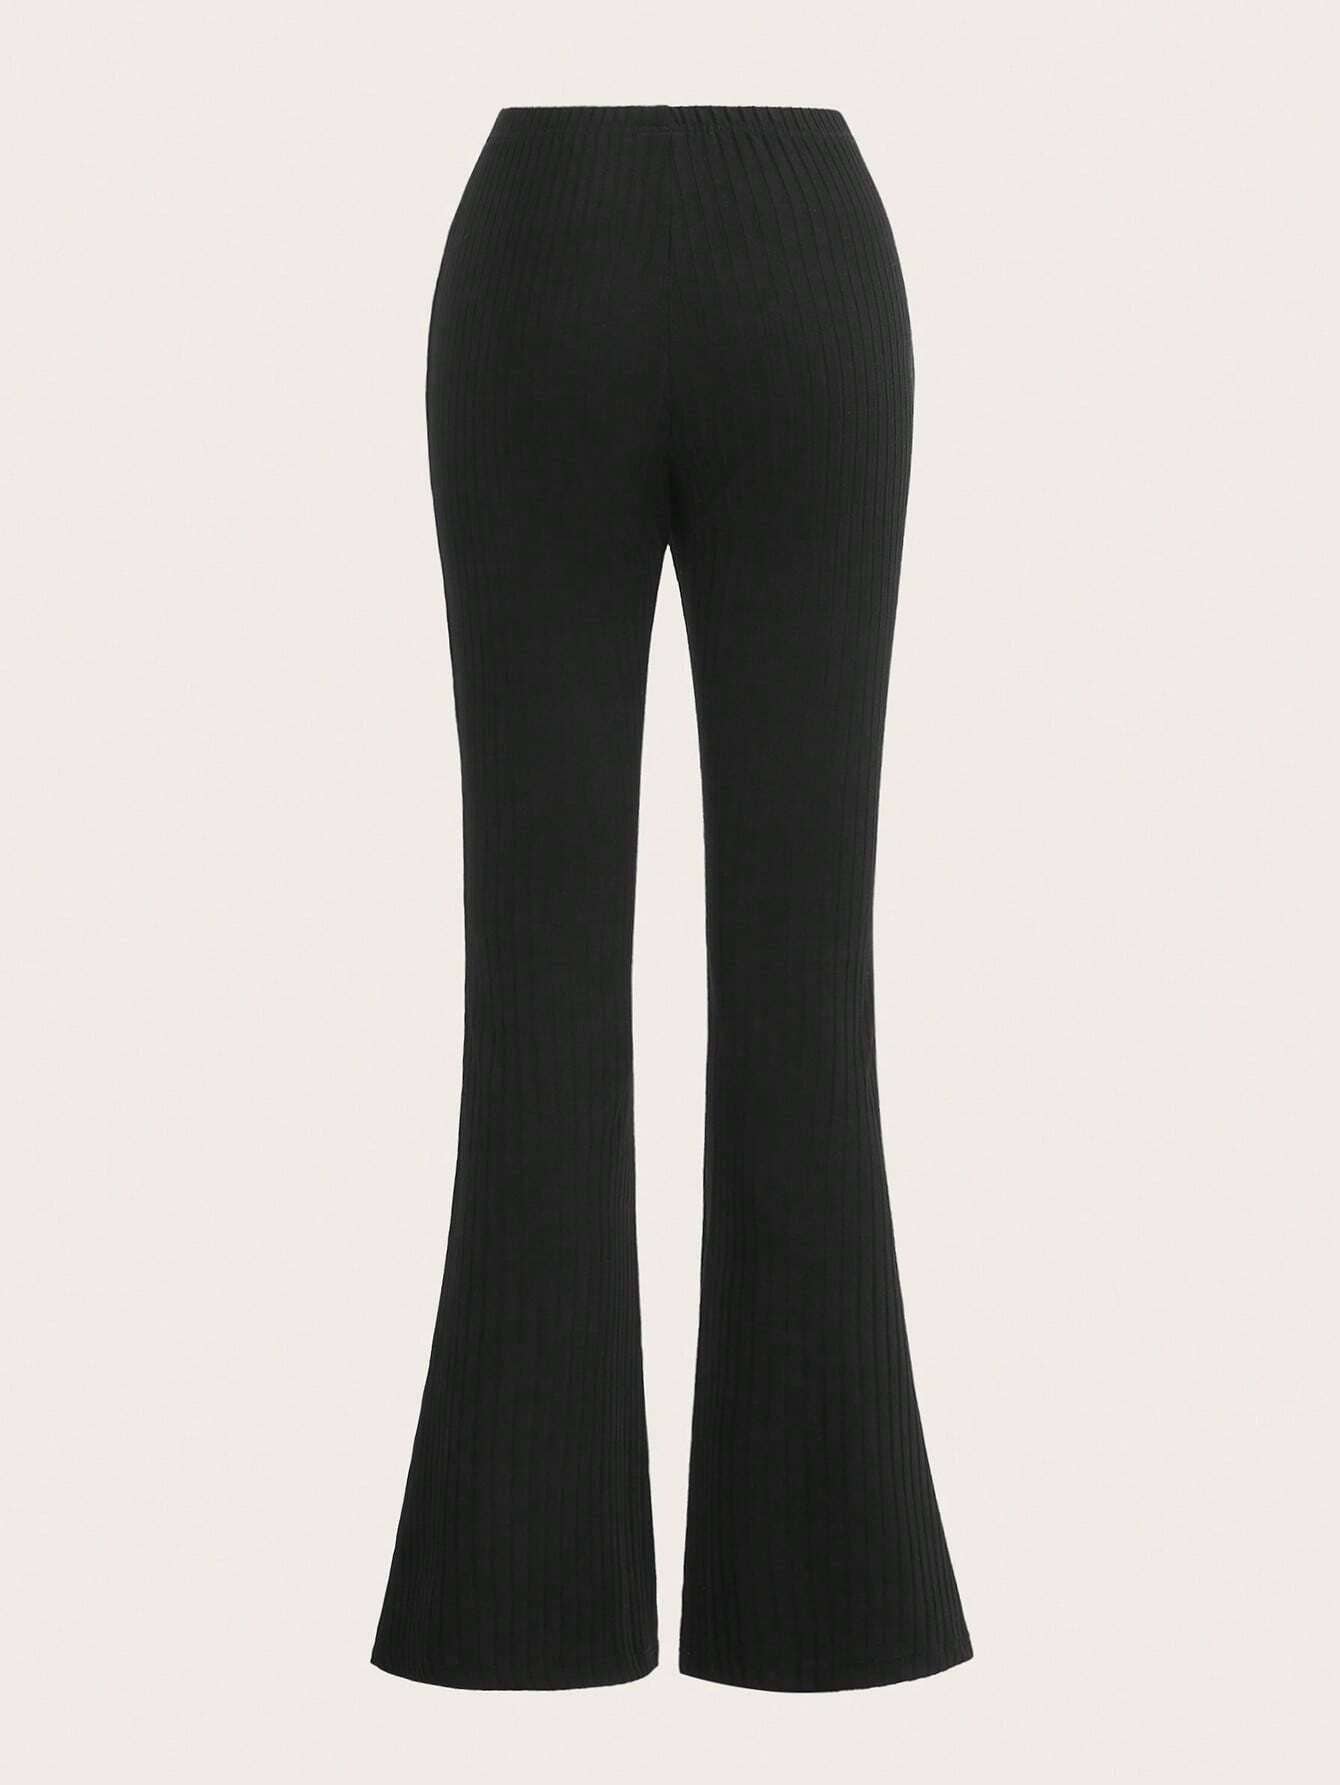 Drawstring Ruched Bell Bottom Fitted Pants Black